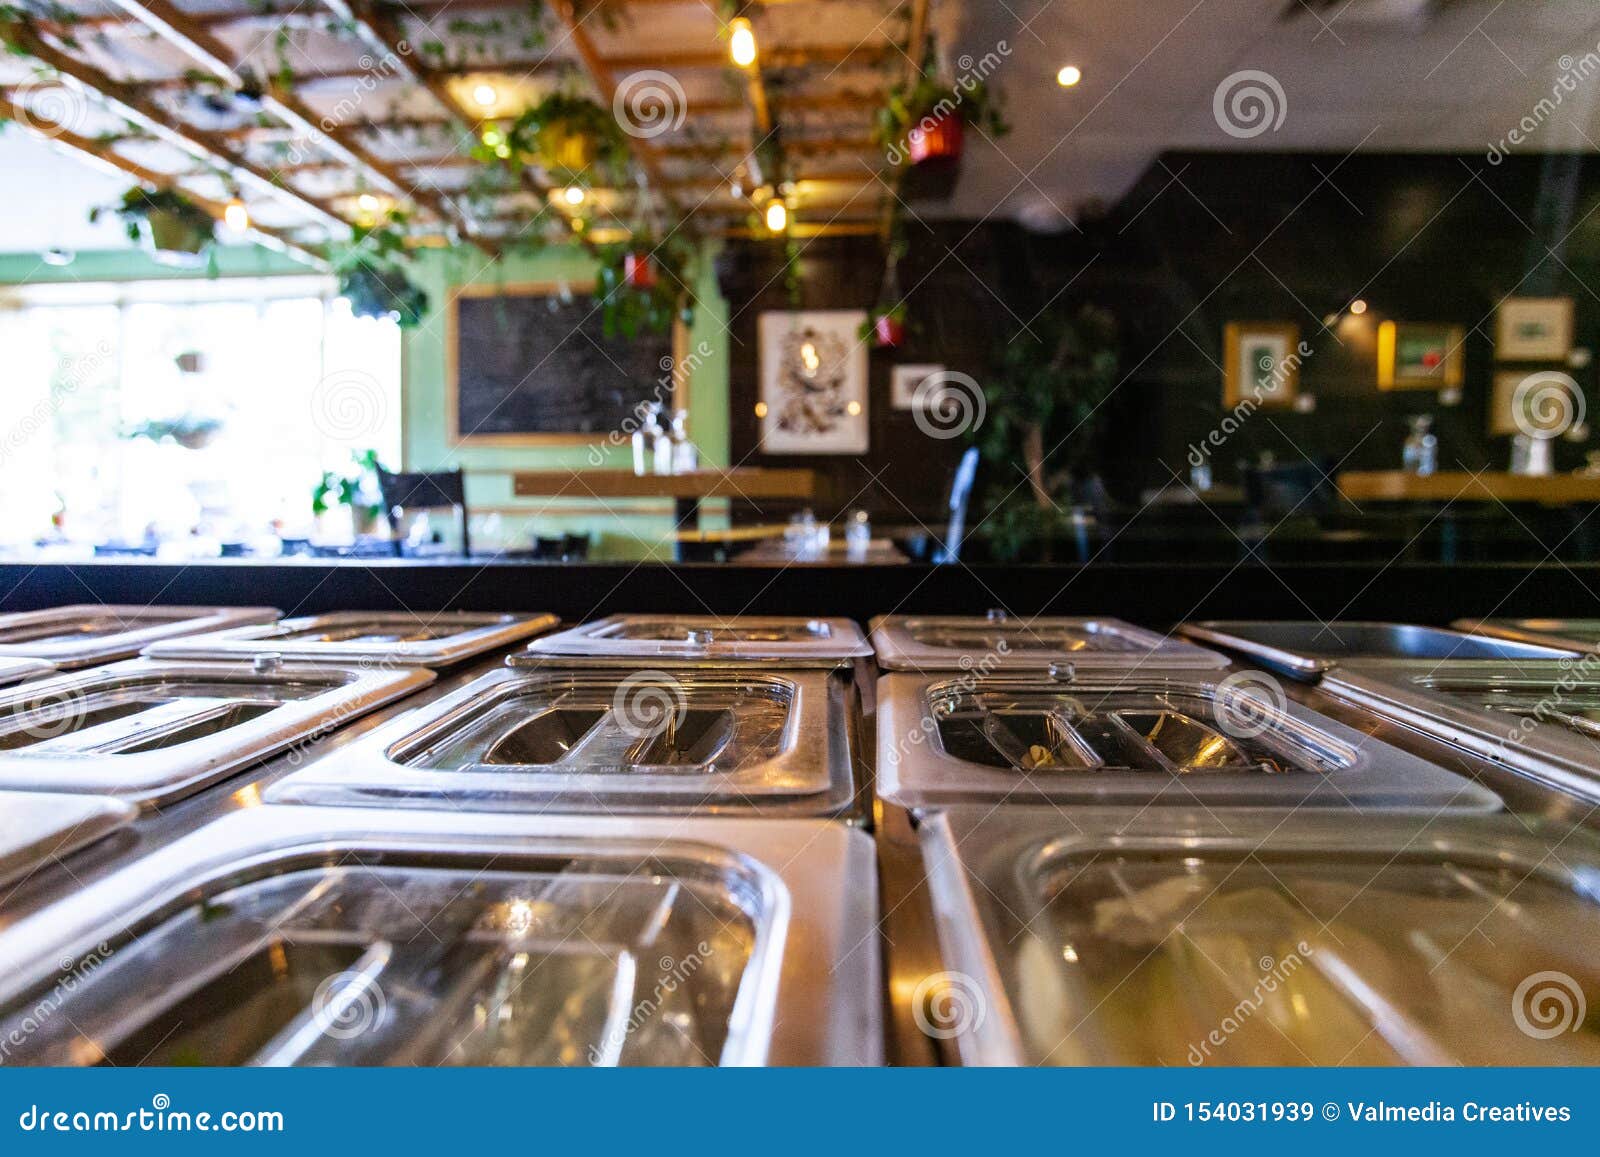 Interiors Of A Modern Restaurant Stock Image Image Of